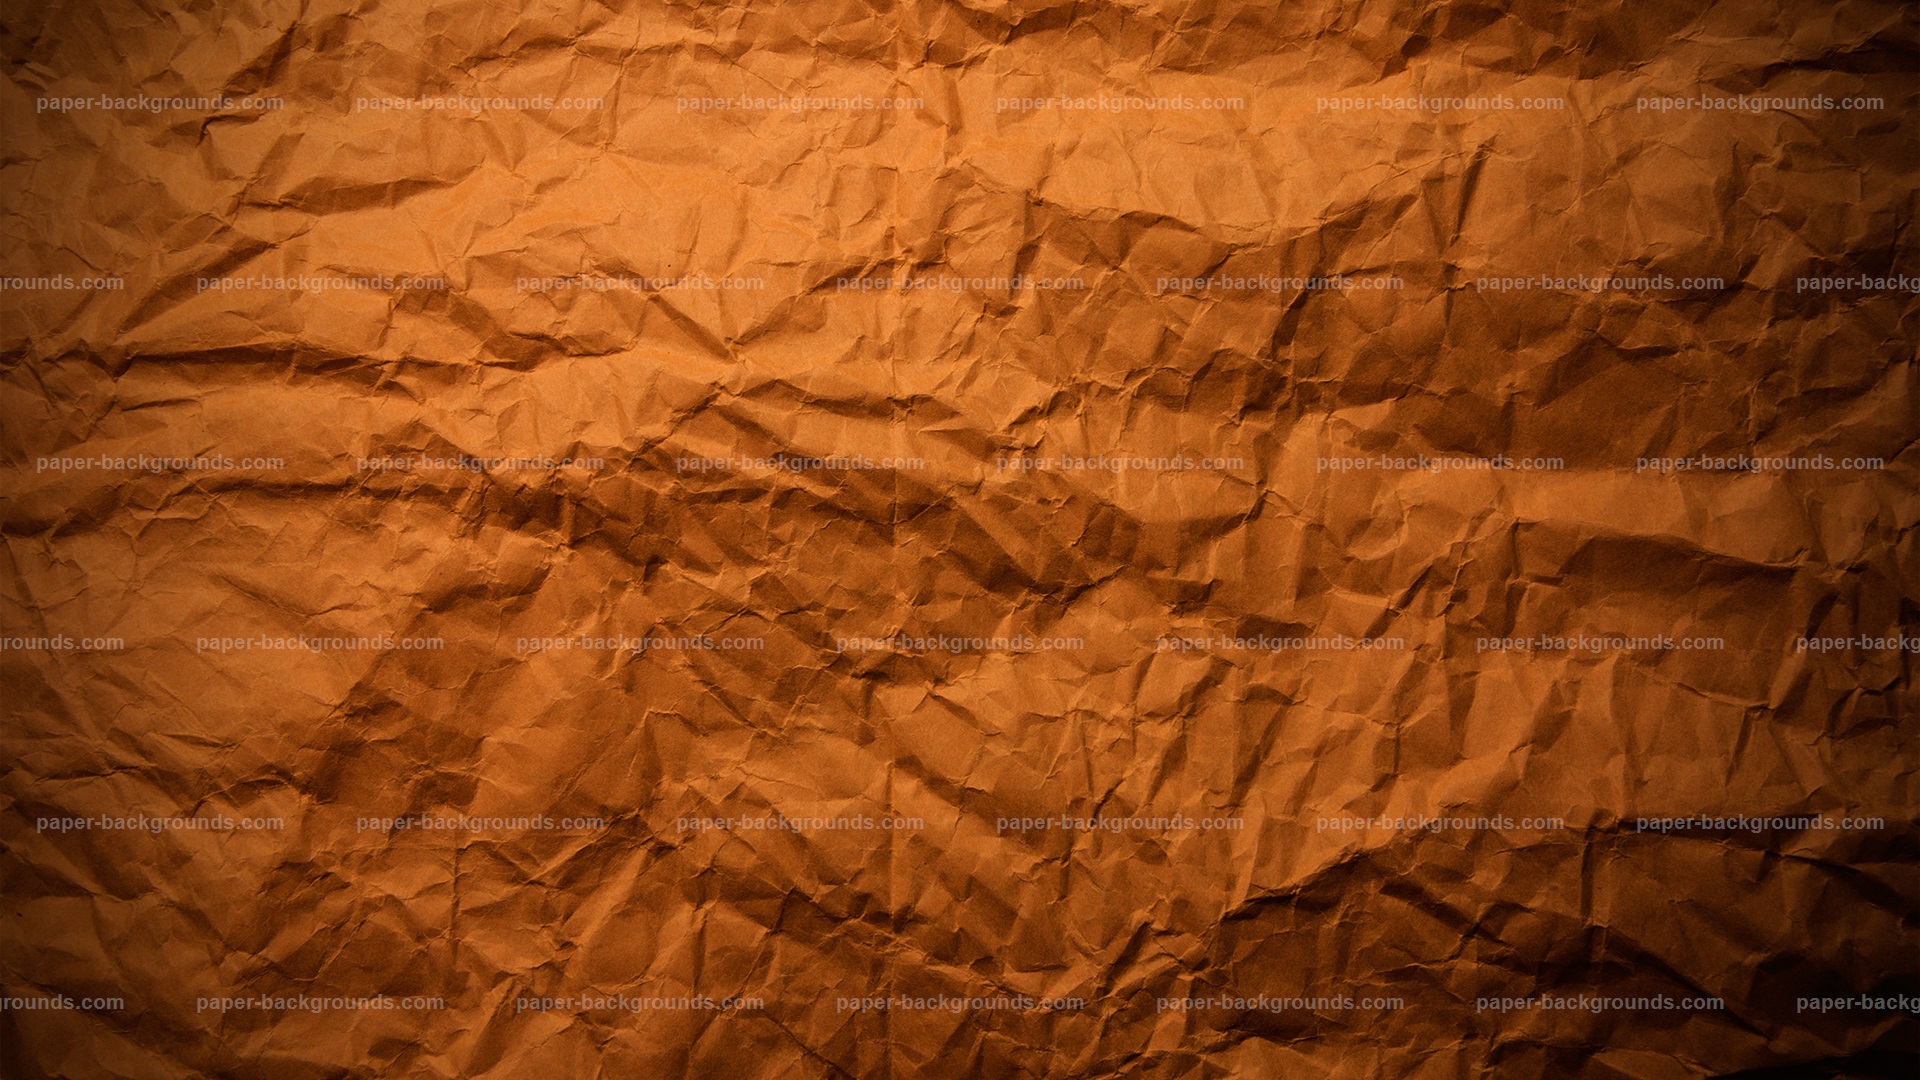 Paper Backgrounds | Wrinkled Brown Paper Texture Background HD